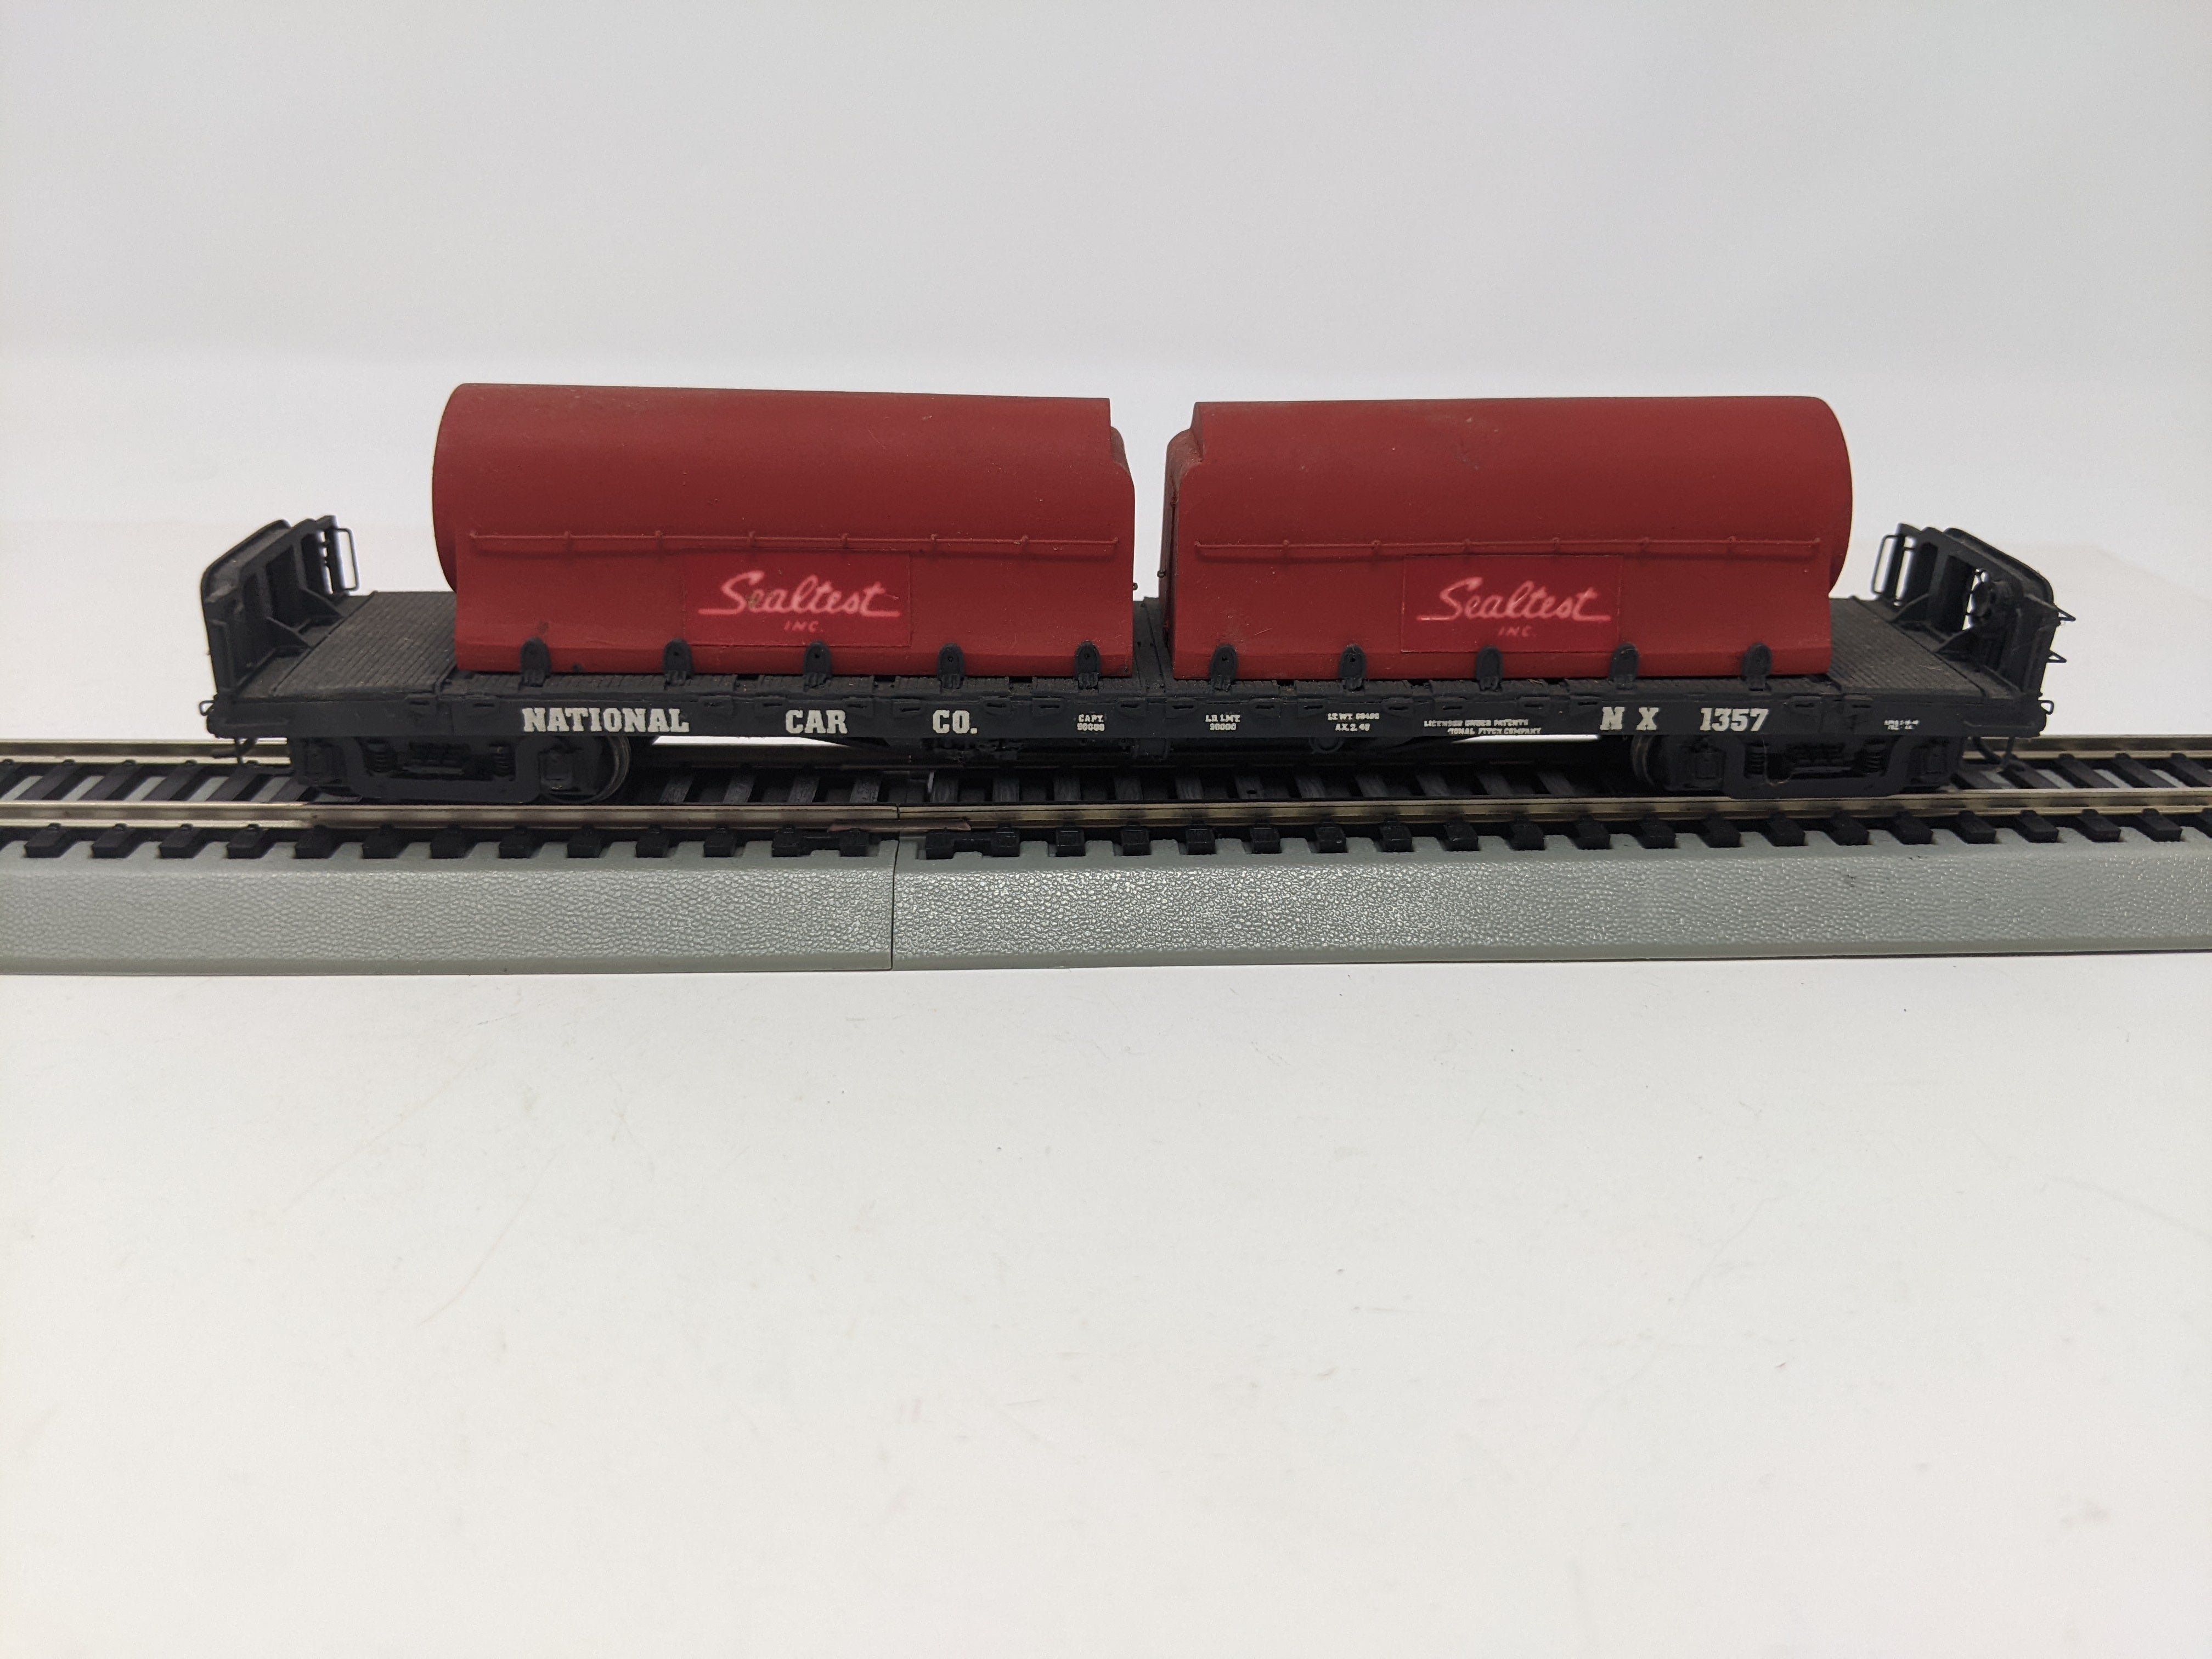 USED HO Scale, 50' Flat Car with 2 Milk Containers, National Car Co NX #1357, Read Description